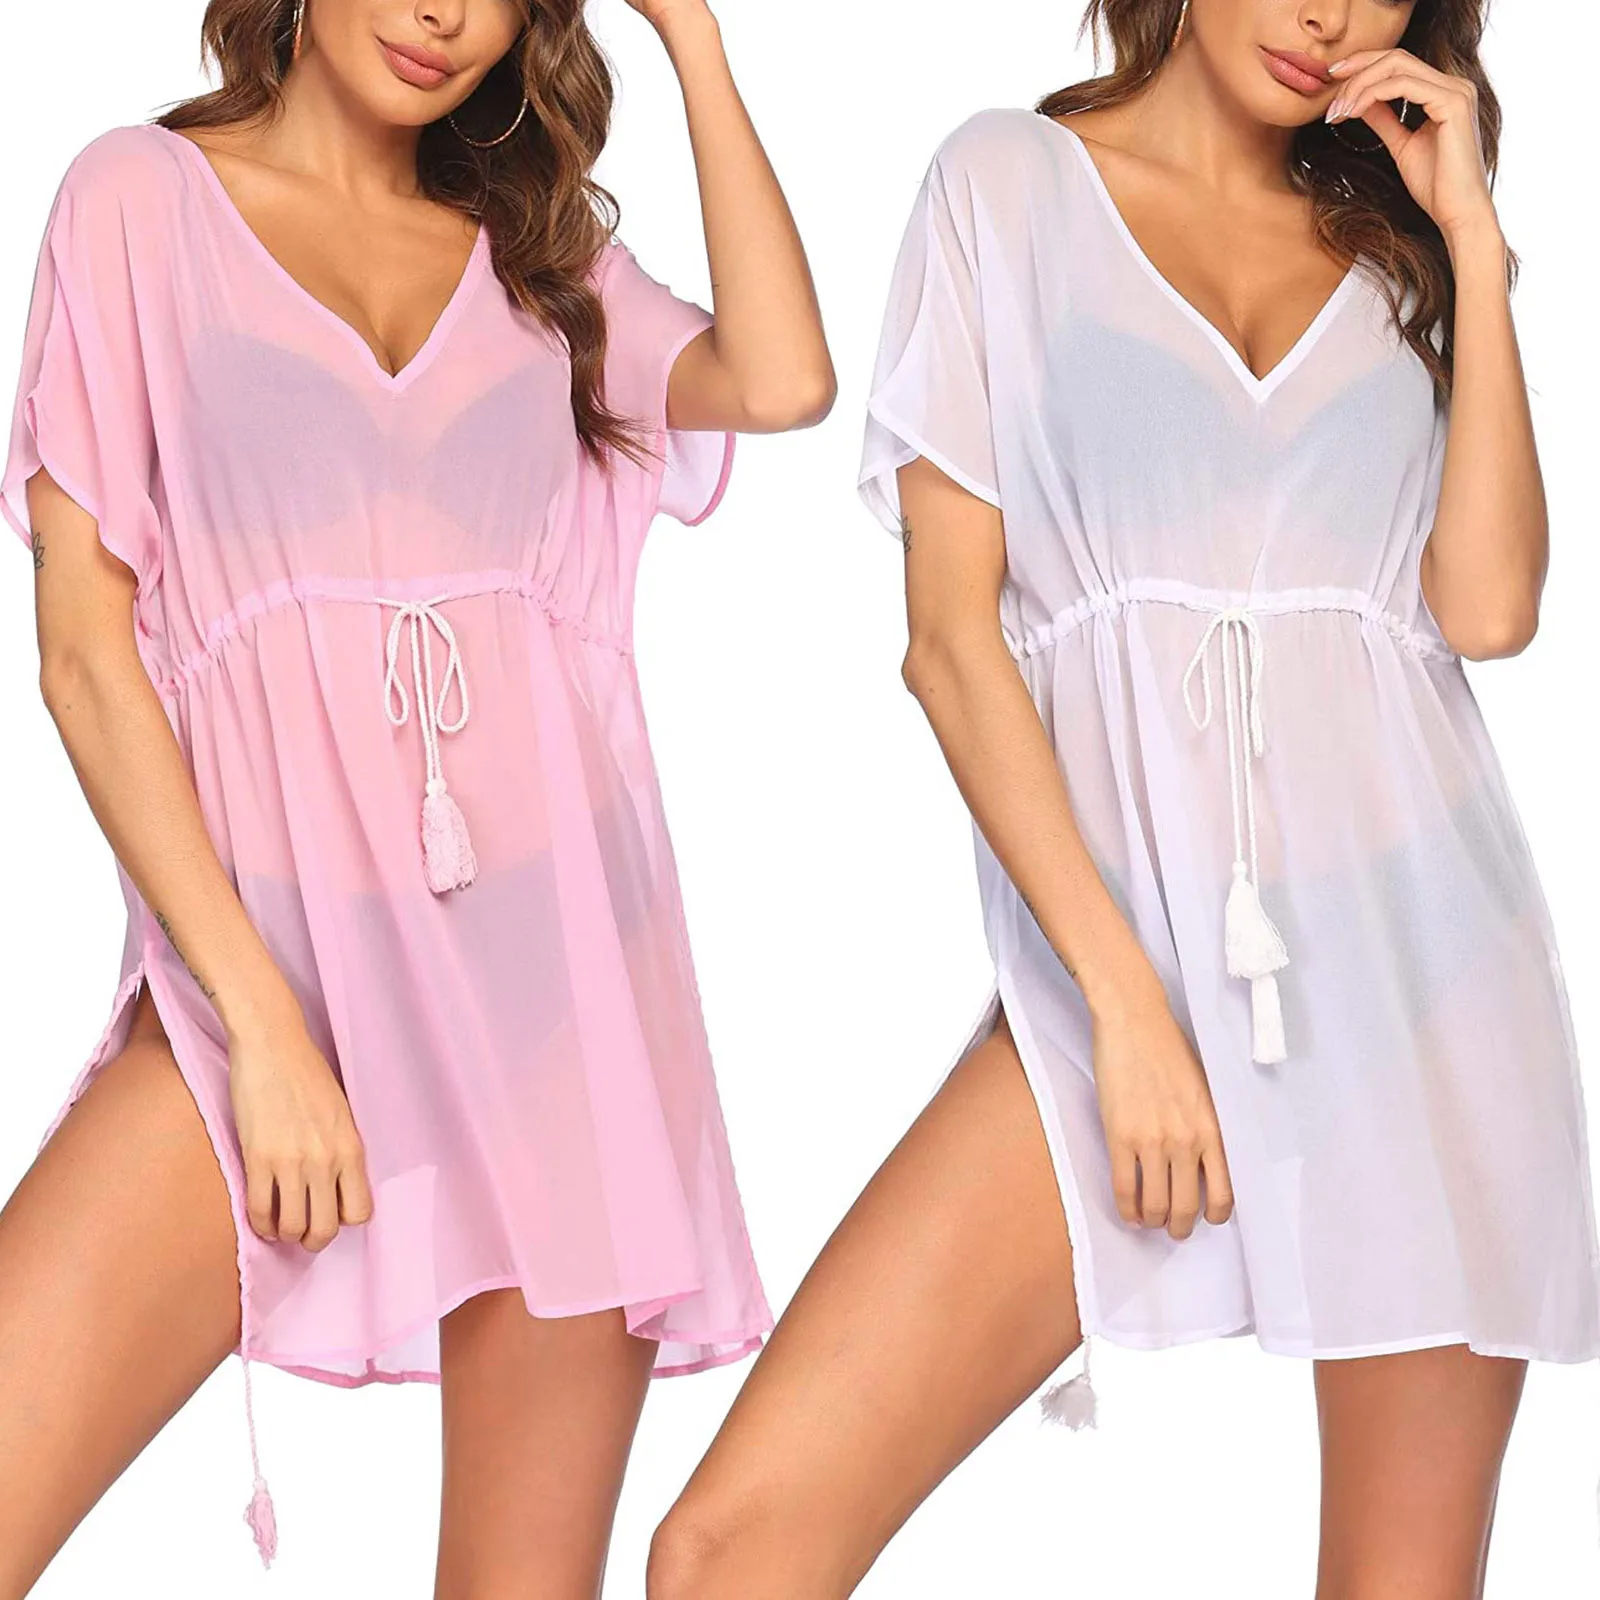 2021 Sexy Women's Bikini Cover Up Solid Mesh Perspective Swimsuit Cover Dress Short Sleeve V-neck Swimwear Cover Ups Beachwear bikini cover up pants